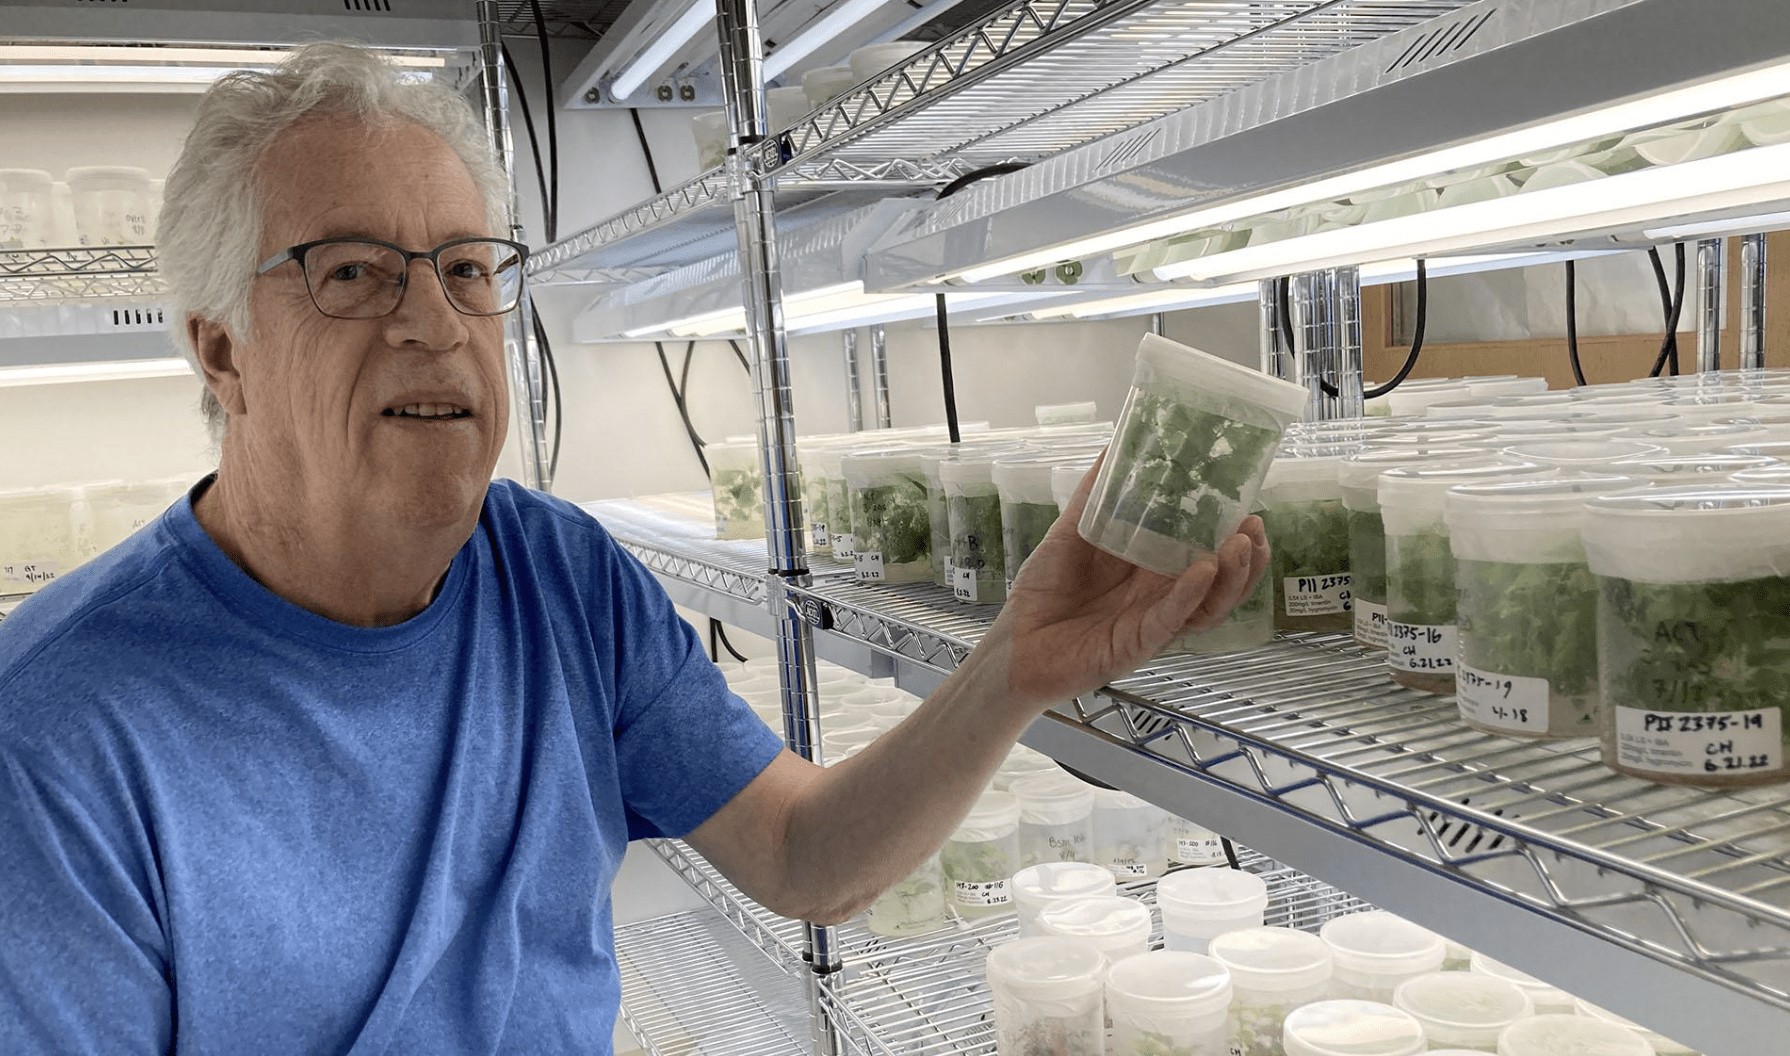 Associate Professor Gary Coleman with a collection of poplar sprouts that he is researching.